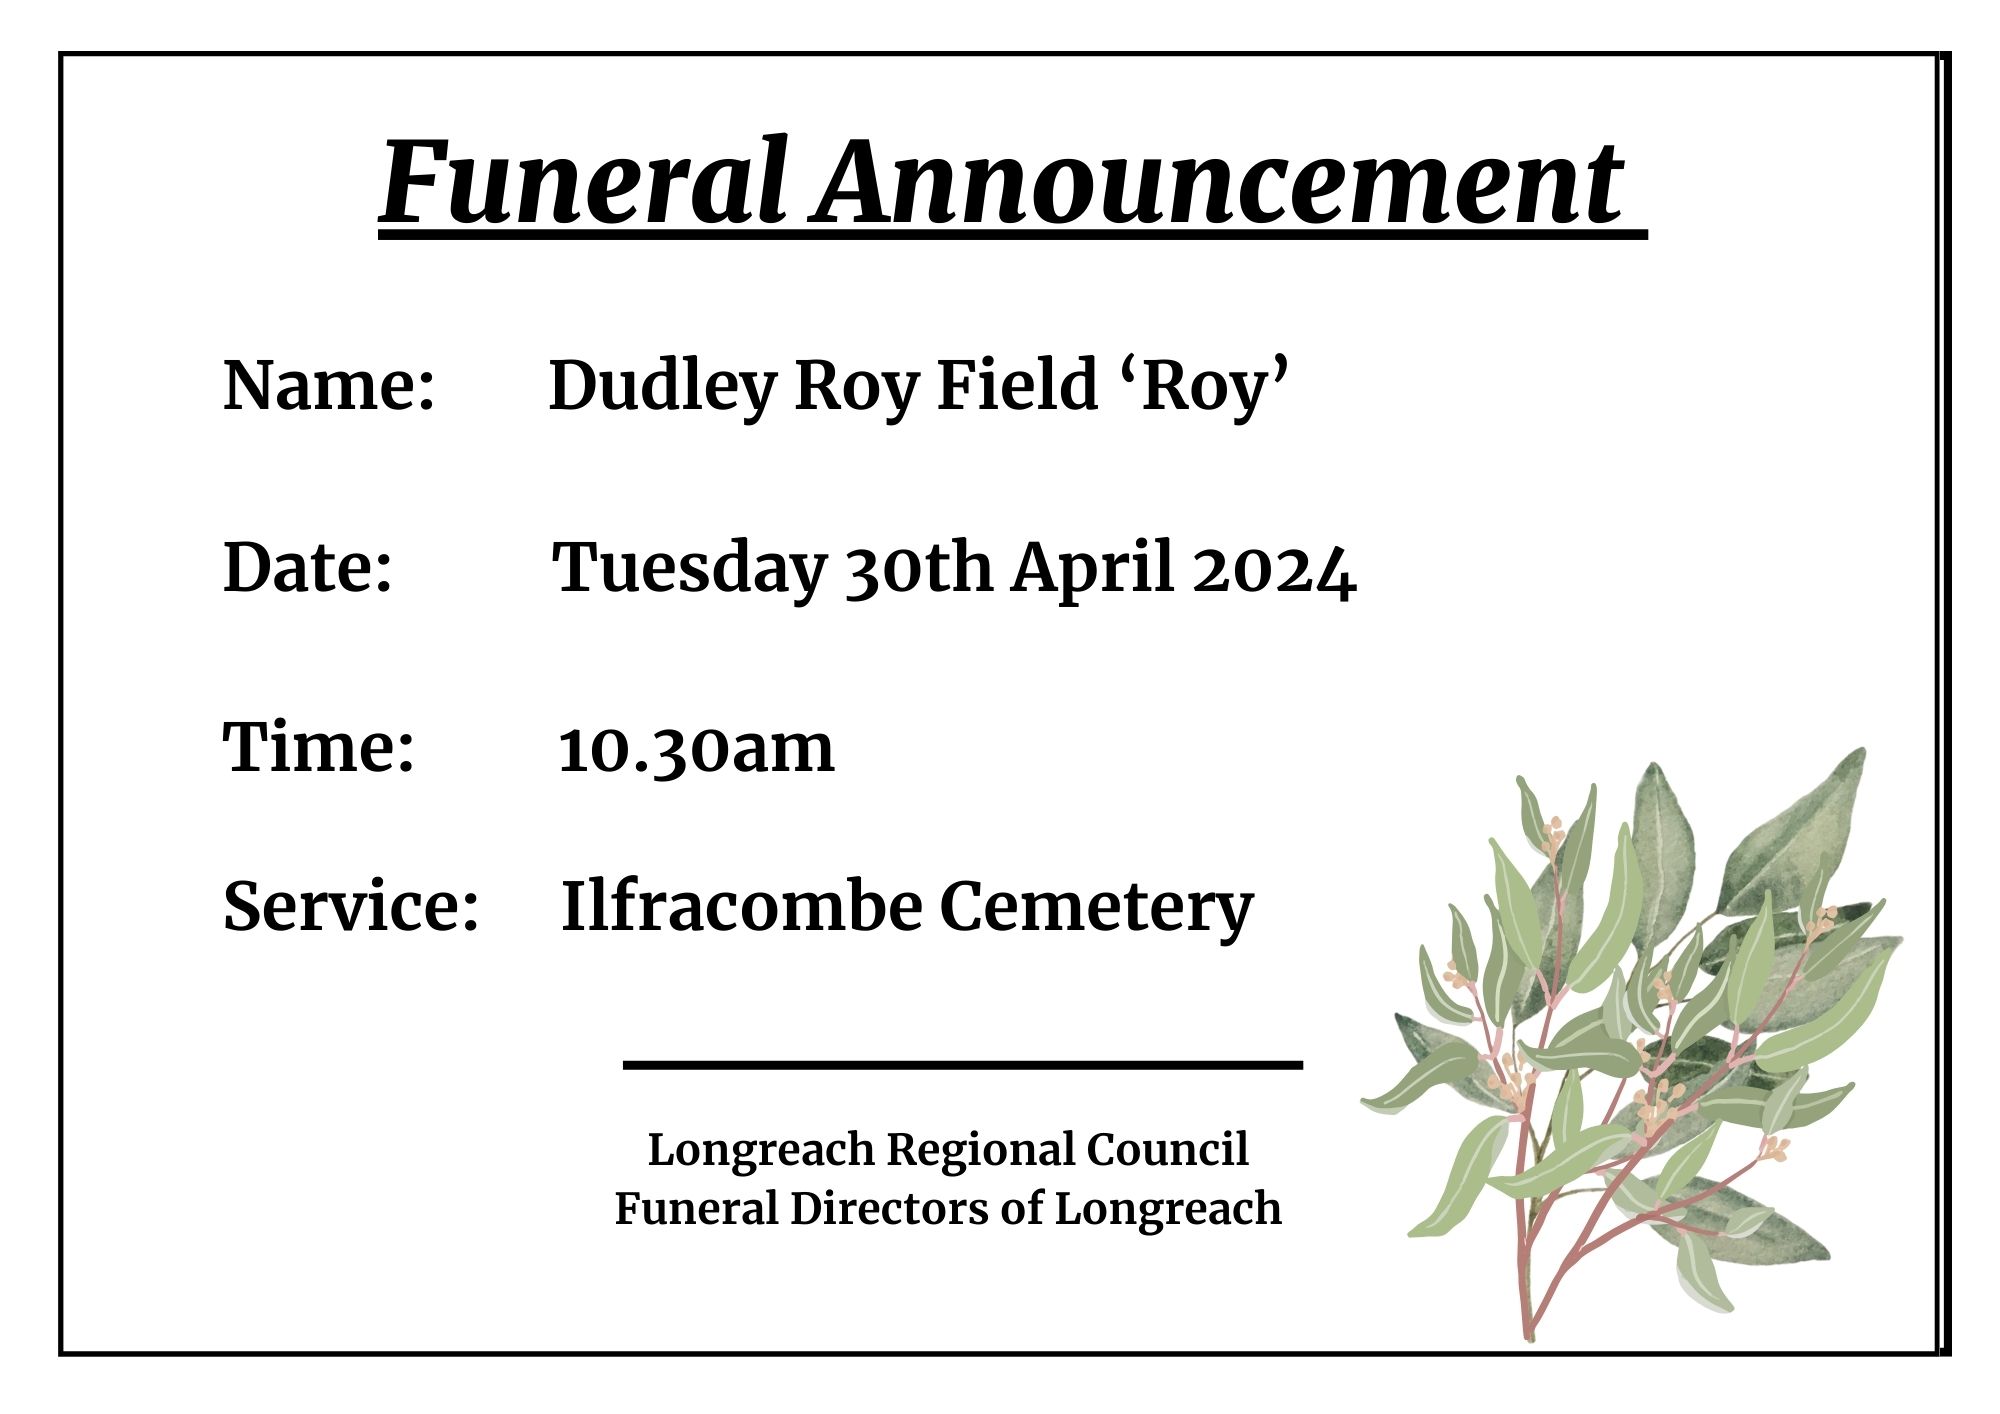 Funeral announcement dudley roy field